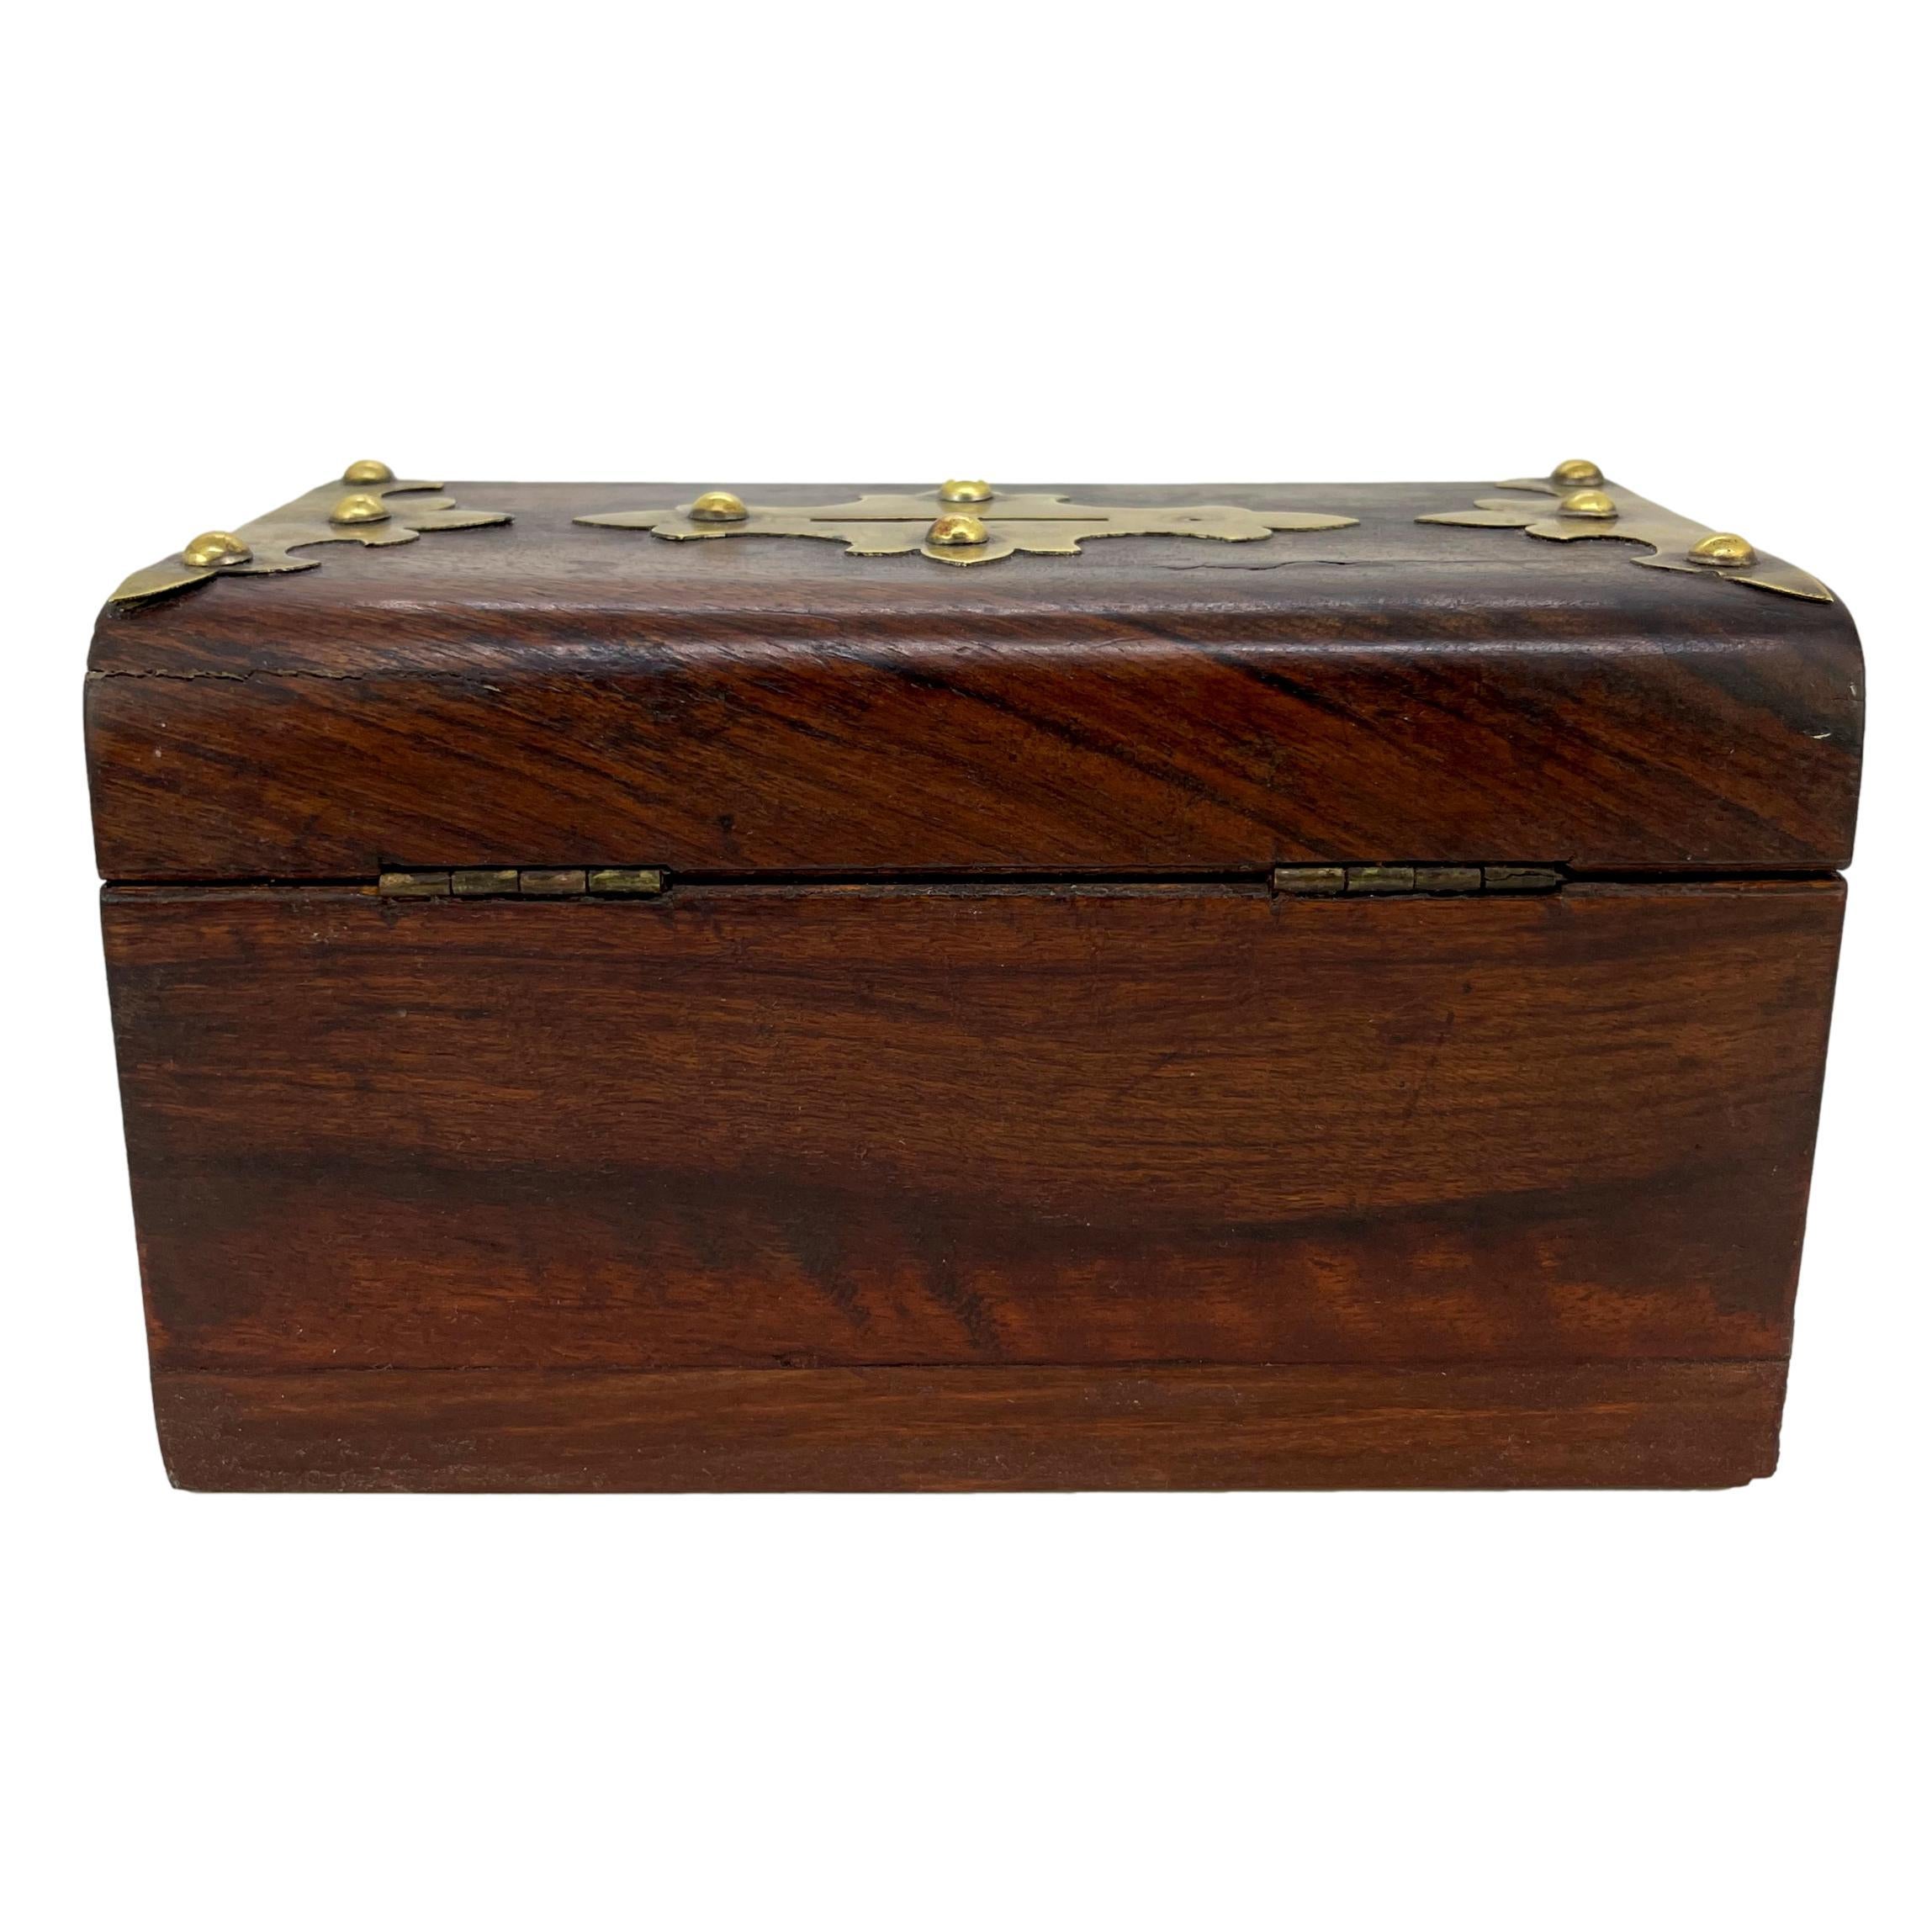 Hand-Crafted Burl Walnut and Brass Embellished Money Box, English, ca. 1860 For Sale